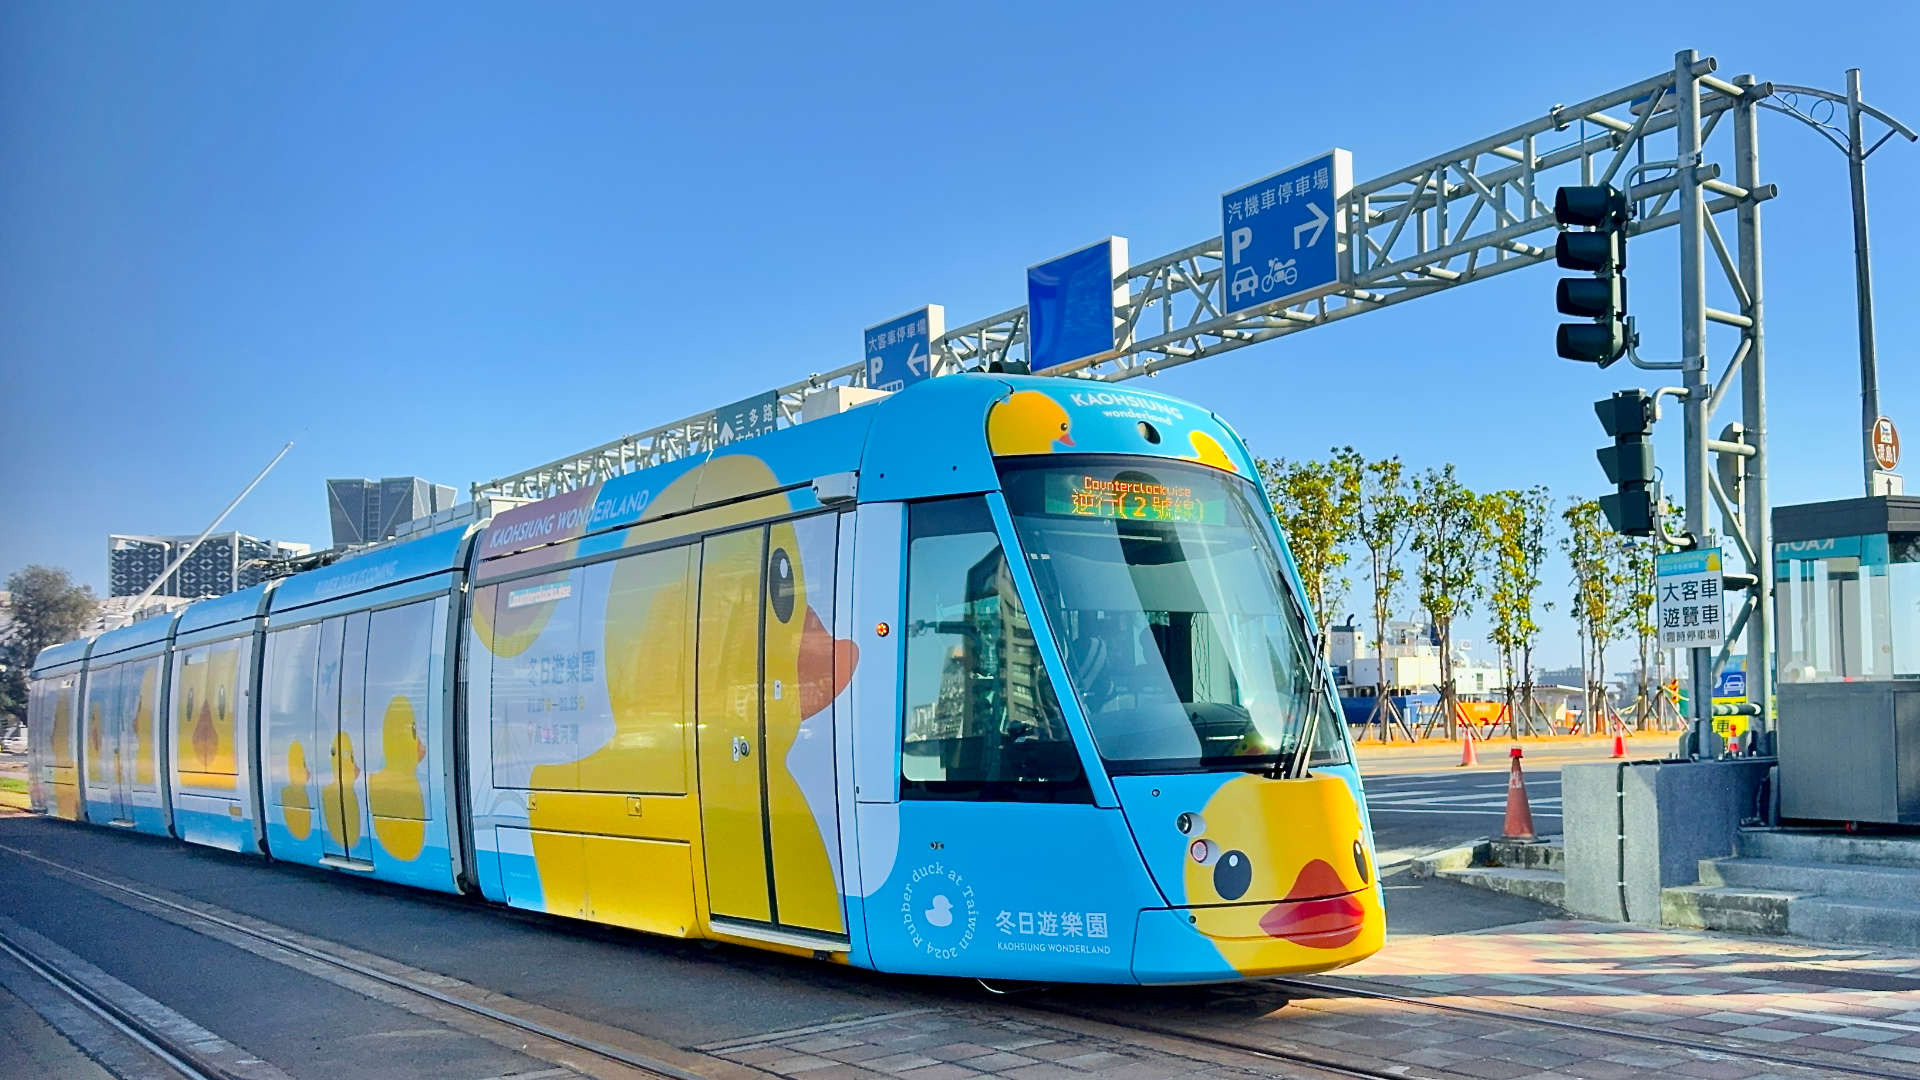 A tram in Kaohsiung decorated in yellow ducks and ‘Kaohsiung Wonderland’ branding.